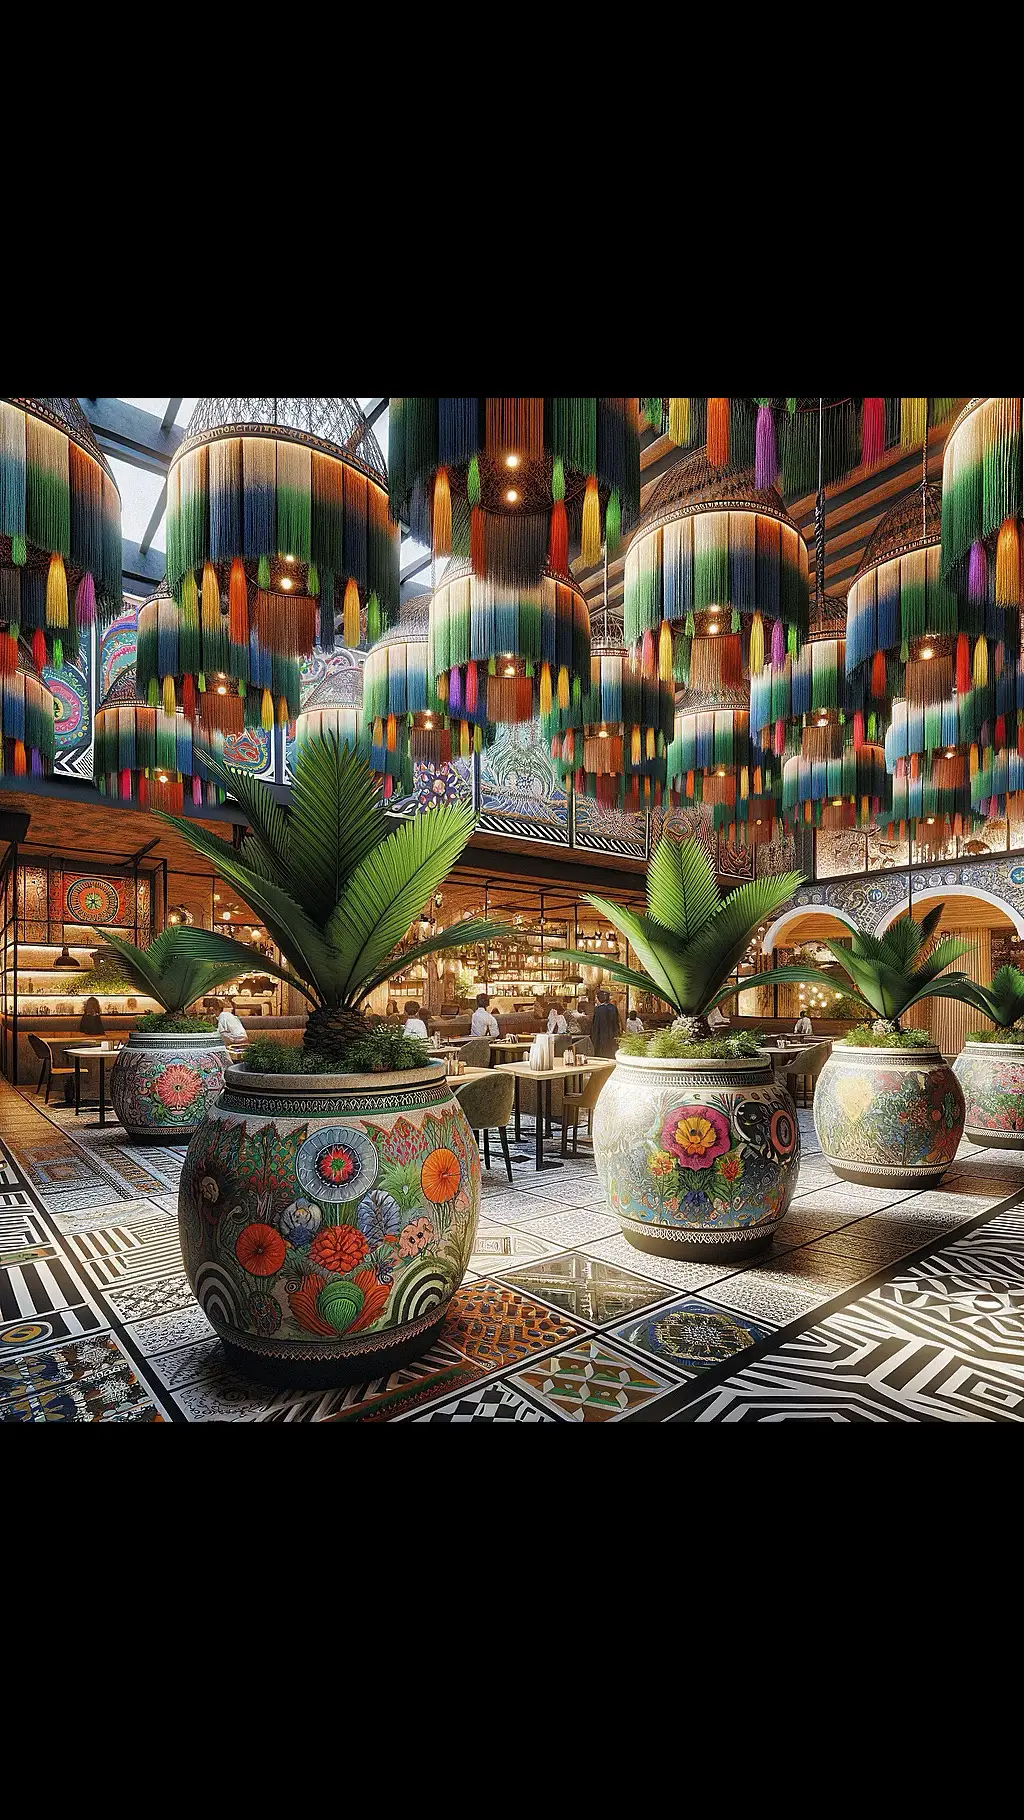 Question: Would You Visit this FUN 🇲🇽 Mexican Restaurant? My @giLherrera twist of Modern Mexican Hacienda Restaurant with some #FridaKahlo & Tulum Vibes At CoLores Decor Our team is constantly experimenting with textures & “WOW” styles for a UNIQUE statement design for any room…Introducing TOP 🇲🇽 MeXican Artisan Design & CATAPULTING our culture’s Talent through the vision of our founder, GiL Herrera @giLherrera ♥️ . We work with many Hotels, Restaurants, Interior Design Studios. We Can do CUSTOM dimensions/colors/designs. . You think you know MeXican Artisan Design, but you have NO IDEA how PASSIONATE , CREATIVE, MASTERFUL, & HARD-WORKING MY PEOPLE ARE.  I, GiL Herrera, founder of CoLores Decor will be my mission to catapult MeXican Design & Designers to the TOP. It NEEDS to be seen & Enjoyed. Your Support is Appreciated!  . . . . #coloresdecor #hacienda  #MexicanHomeDecor #HandmadeHomeDecor #ModernMexicanDecor #MexicanArtisan #HandcraftedDecor #palmspringsstyle #ContemporaryMexican #Mexicanrestaurant #ArtisanalDecor #elledecor #restaurantdesign #PalmSprings #RusticModern #MexicanFolkArt #FolkArtDecor #MexicanHacienda #palmspringslife #HomeInspiration #InteriorDecorating #HomeStyling #DecorInspo #HandmadeFurniture #MexicanDesign #architecture #archdigest #arquitectura #InteriorDesignInspiration #fyp